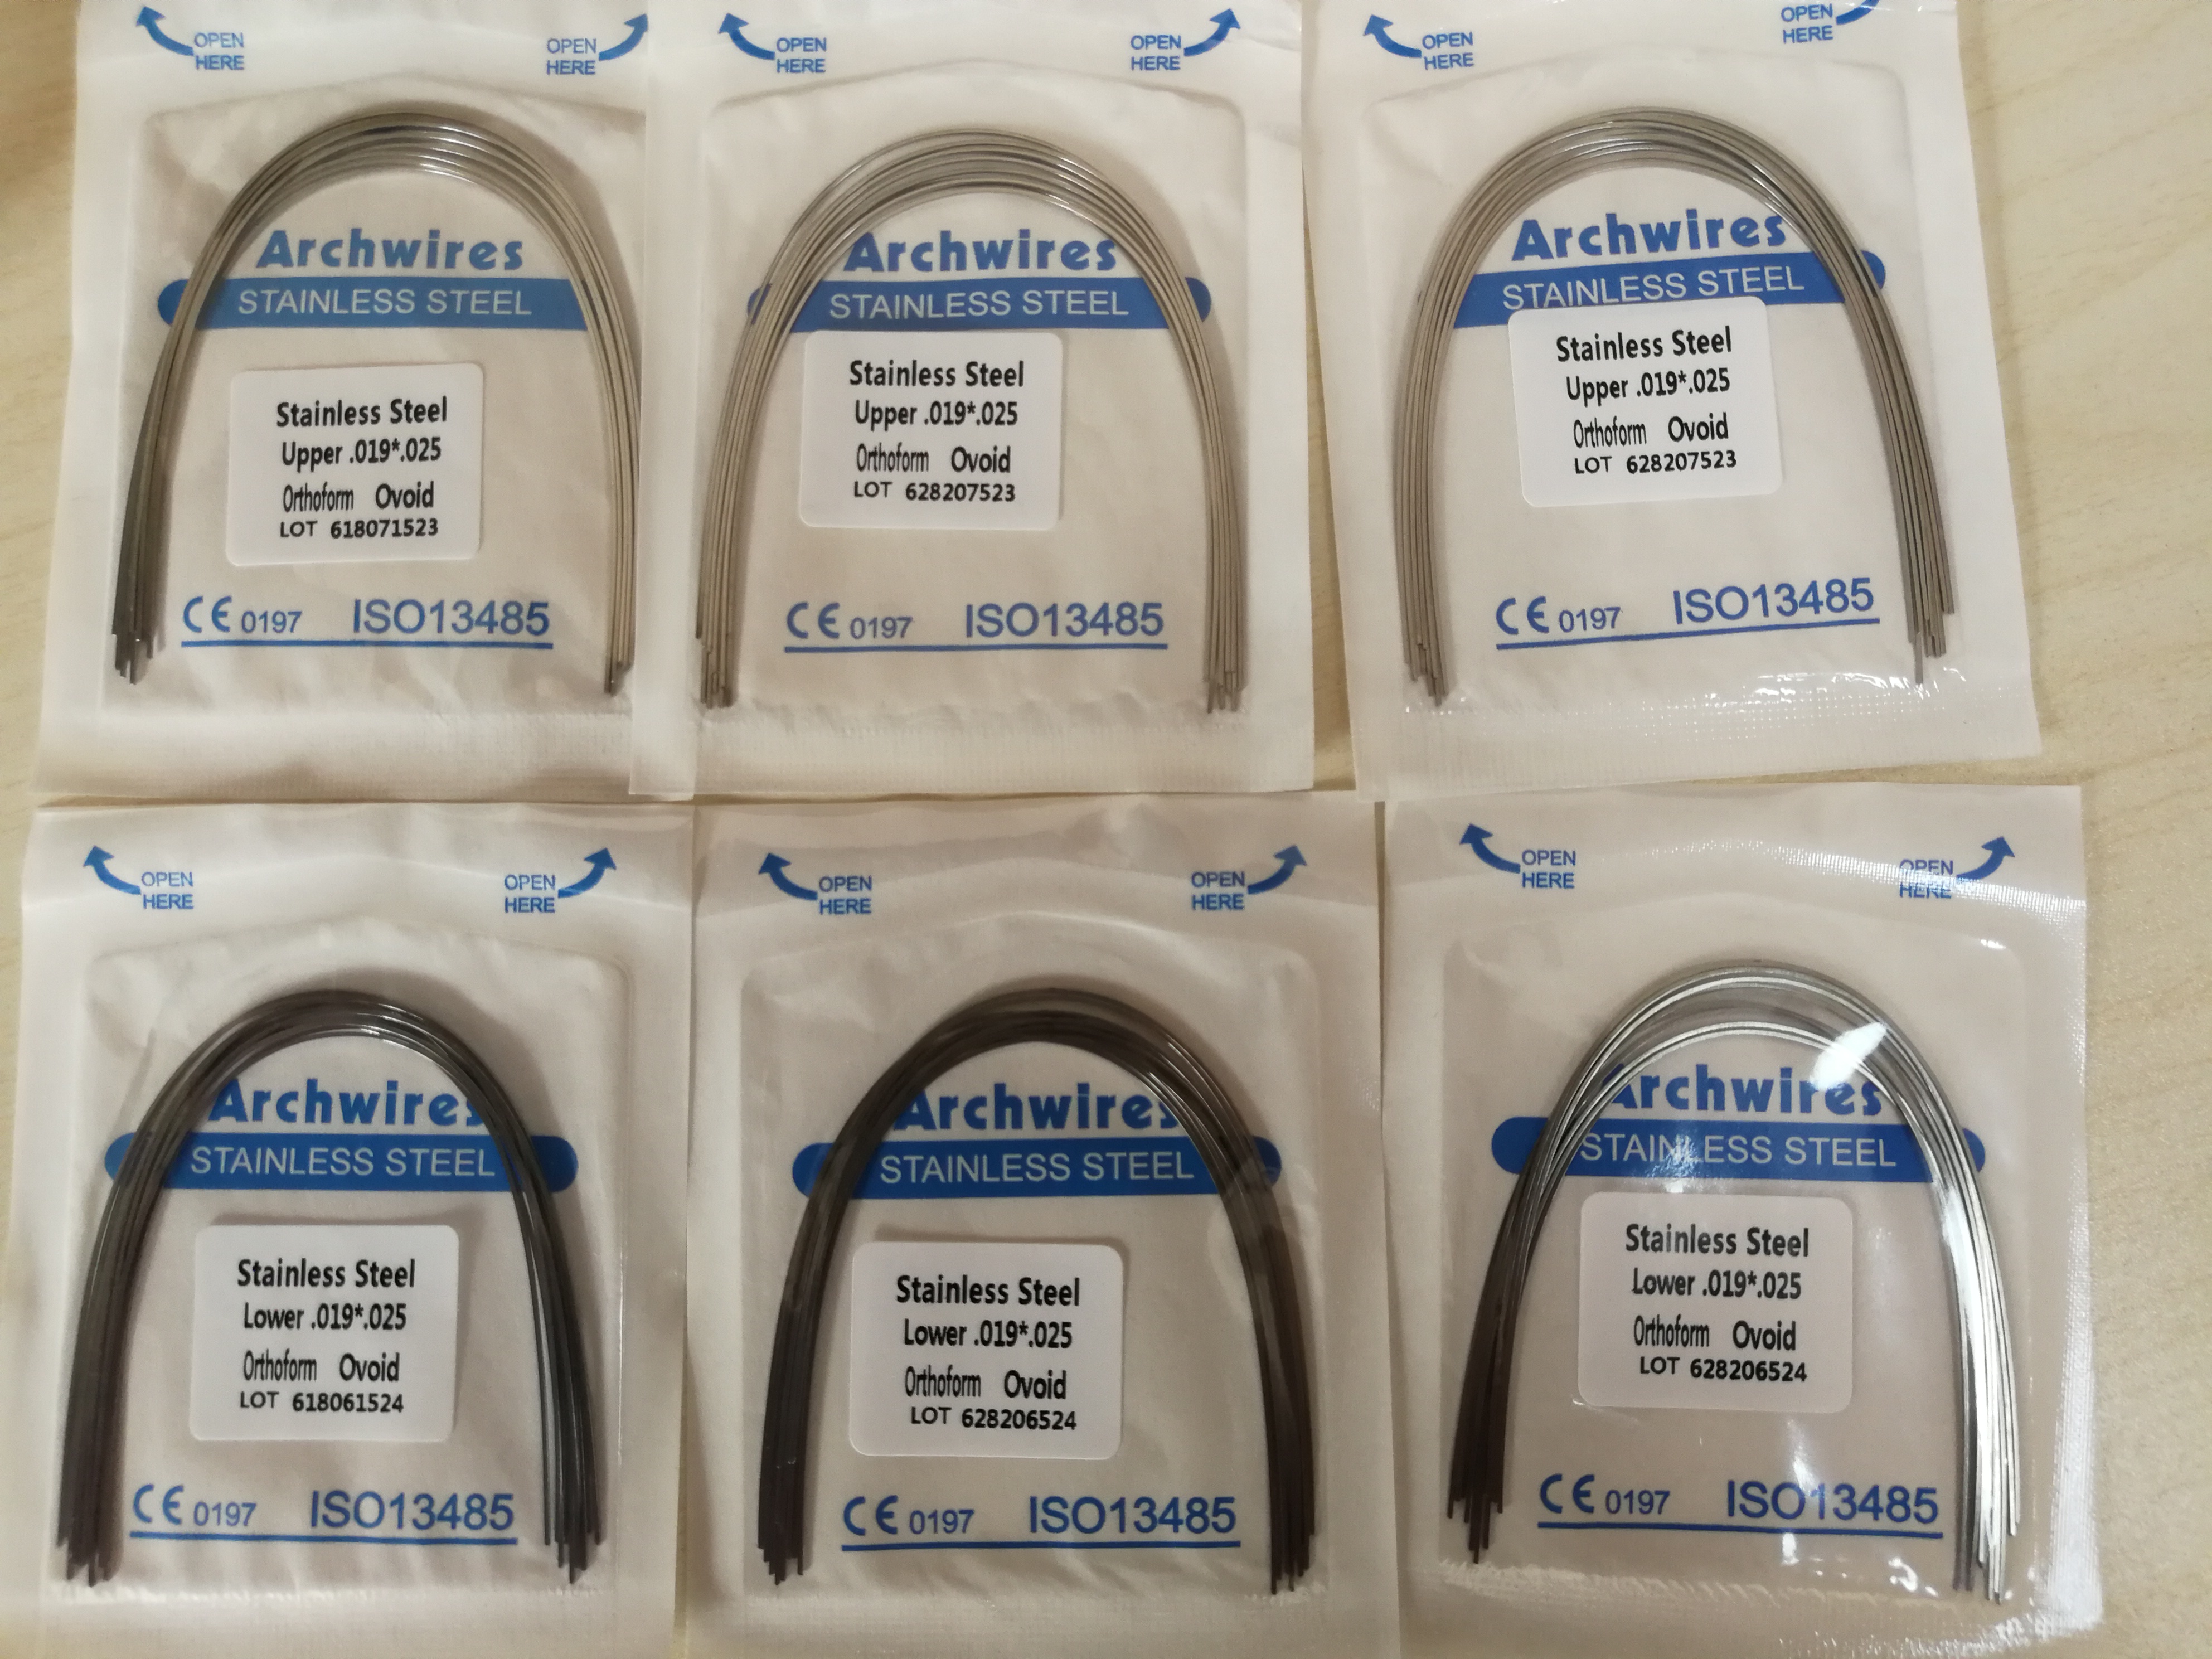 Dental Orthodontic Rectangular Arch Wire Stainless Steel  Wire